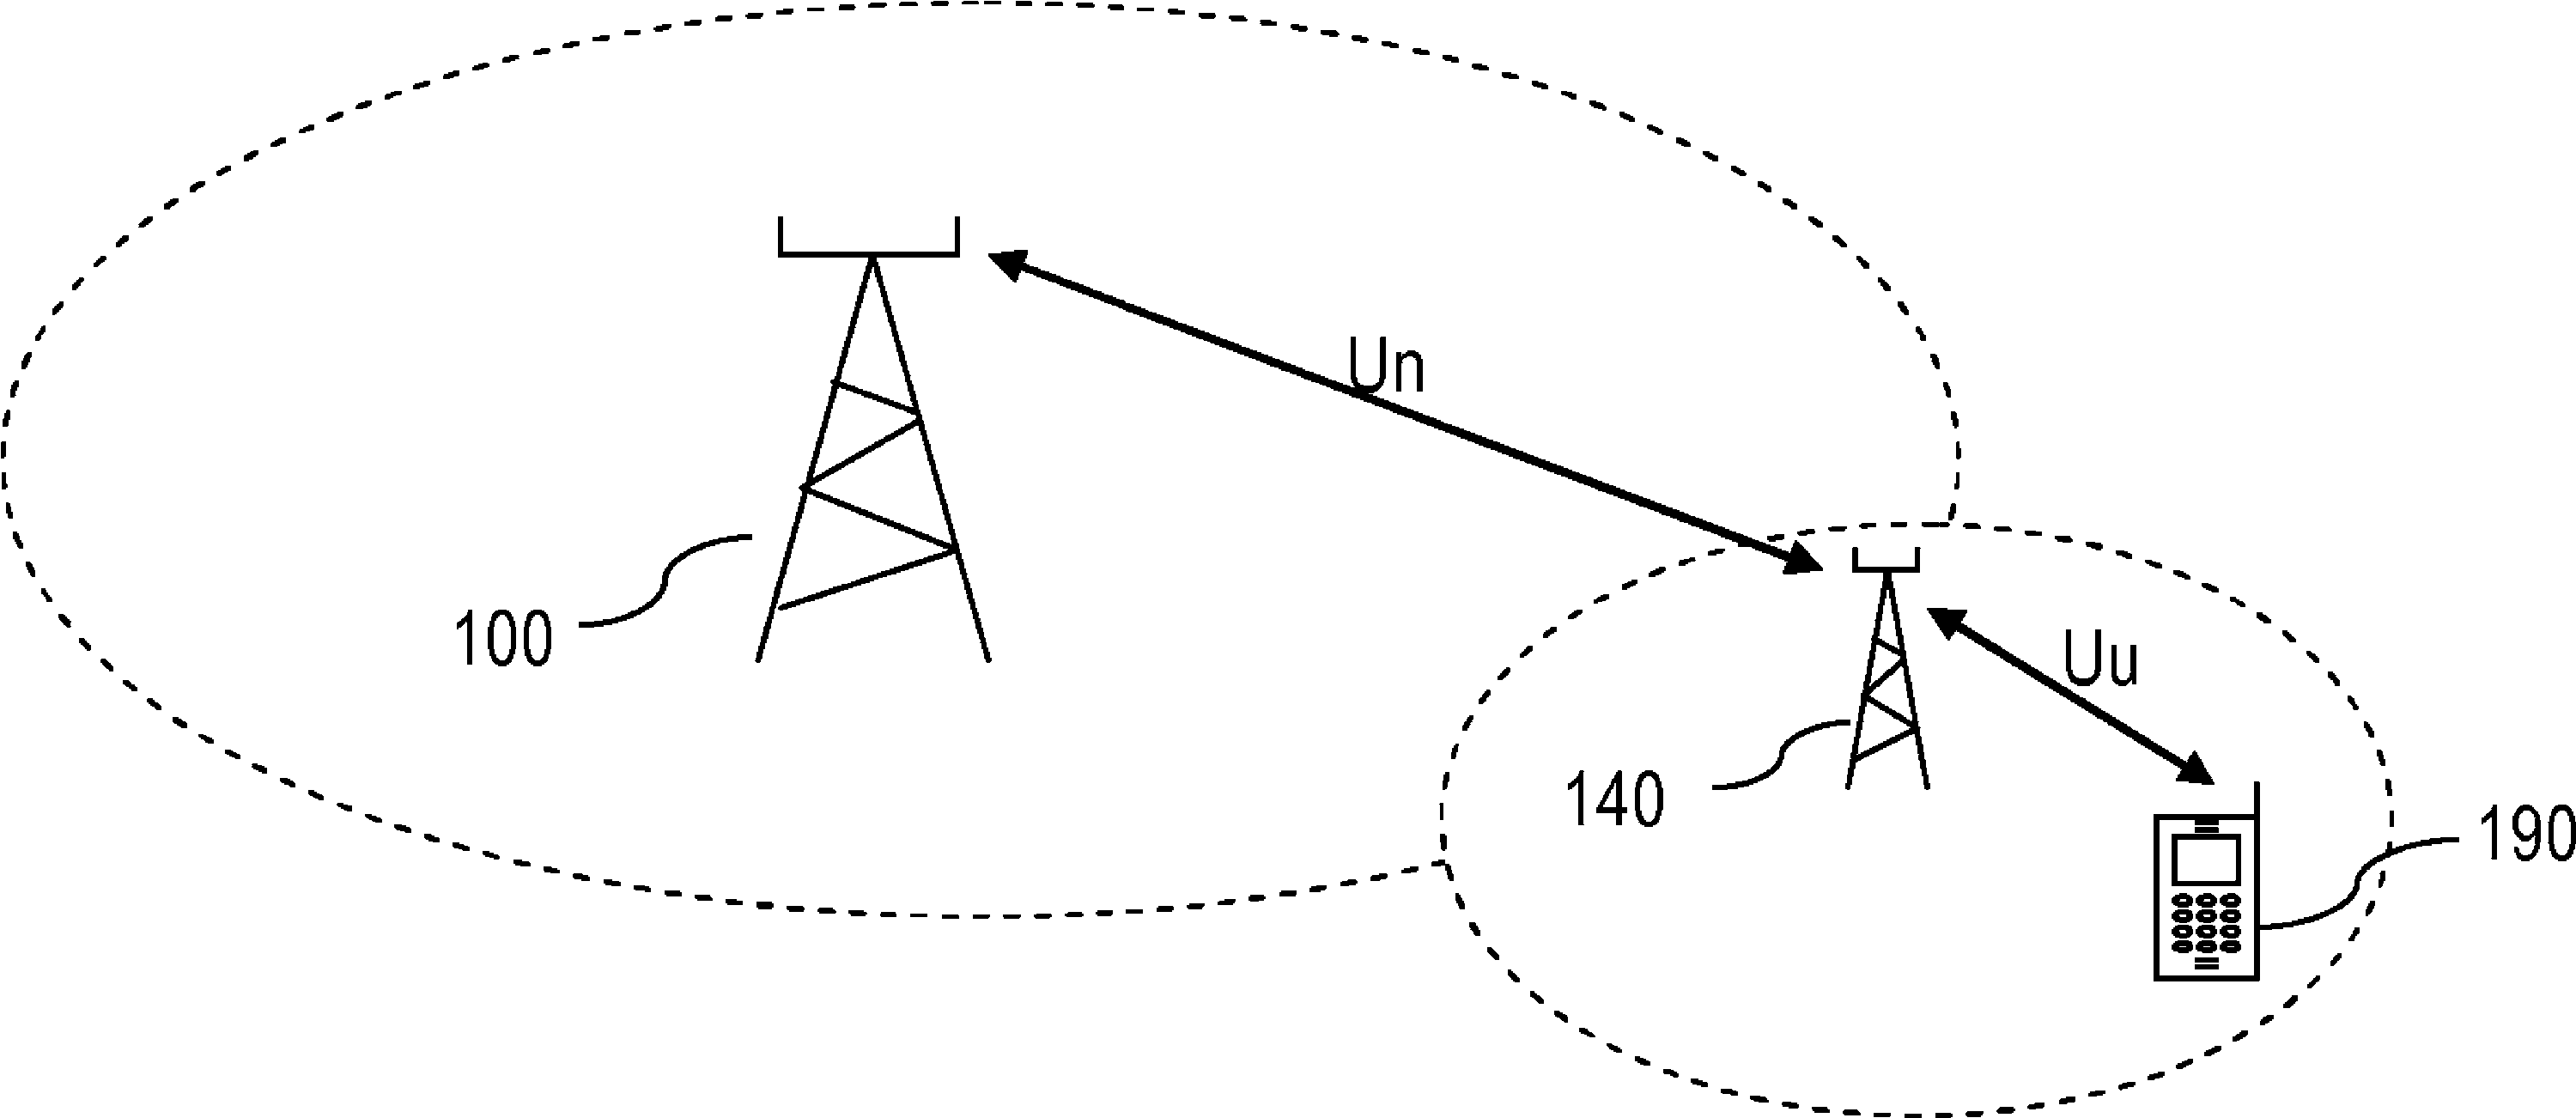 Sub-carrier allocation in a wireless communication system